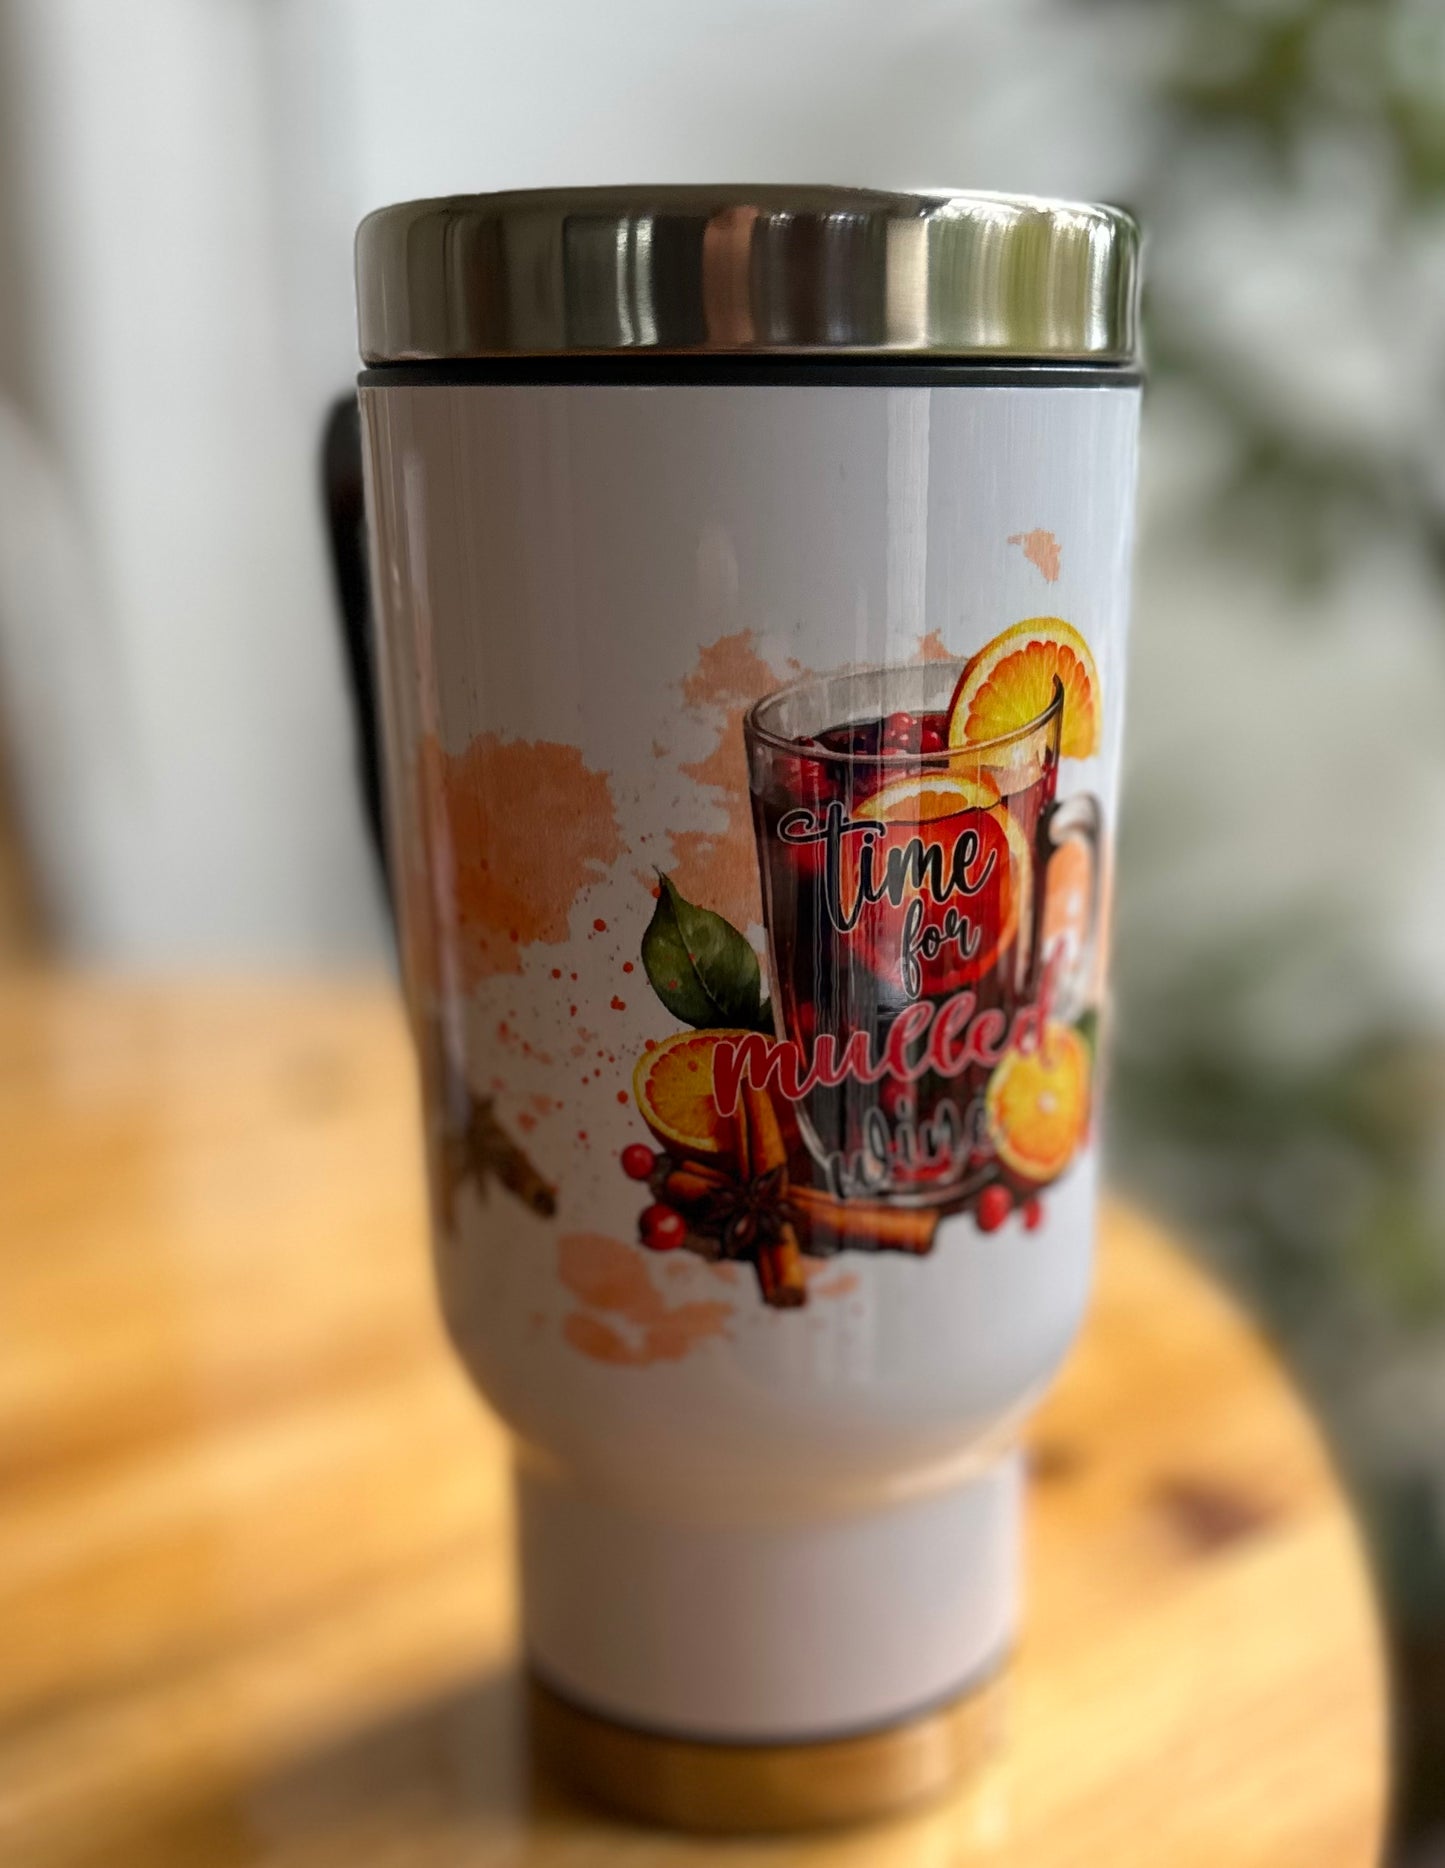 Stainless steel thermal mug with handle in white